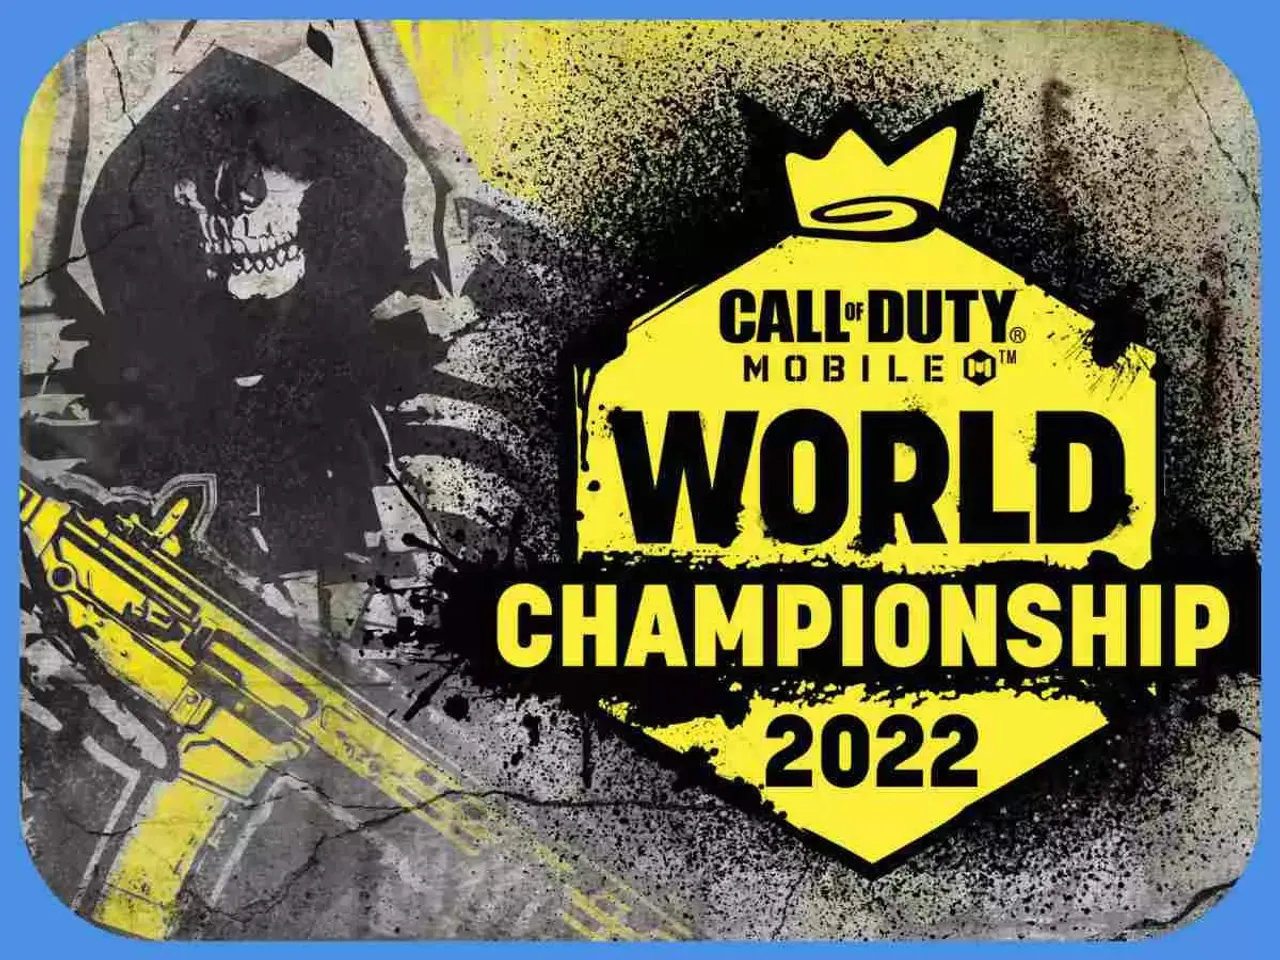 COD Mobile World Championship teams, schedule & prize money 16 teams of the COD Mobile World Championship 2022 COD Mobile World Championship 2022 COD Mobile World Championship 2022 Groups